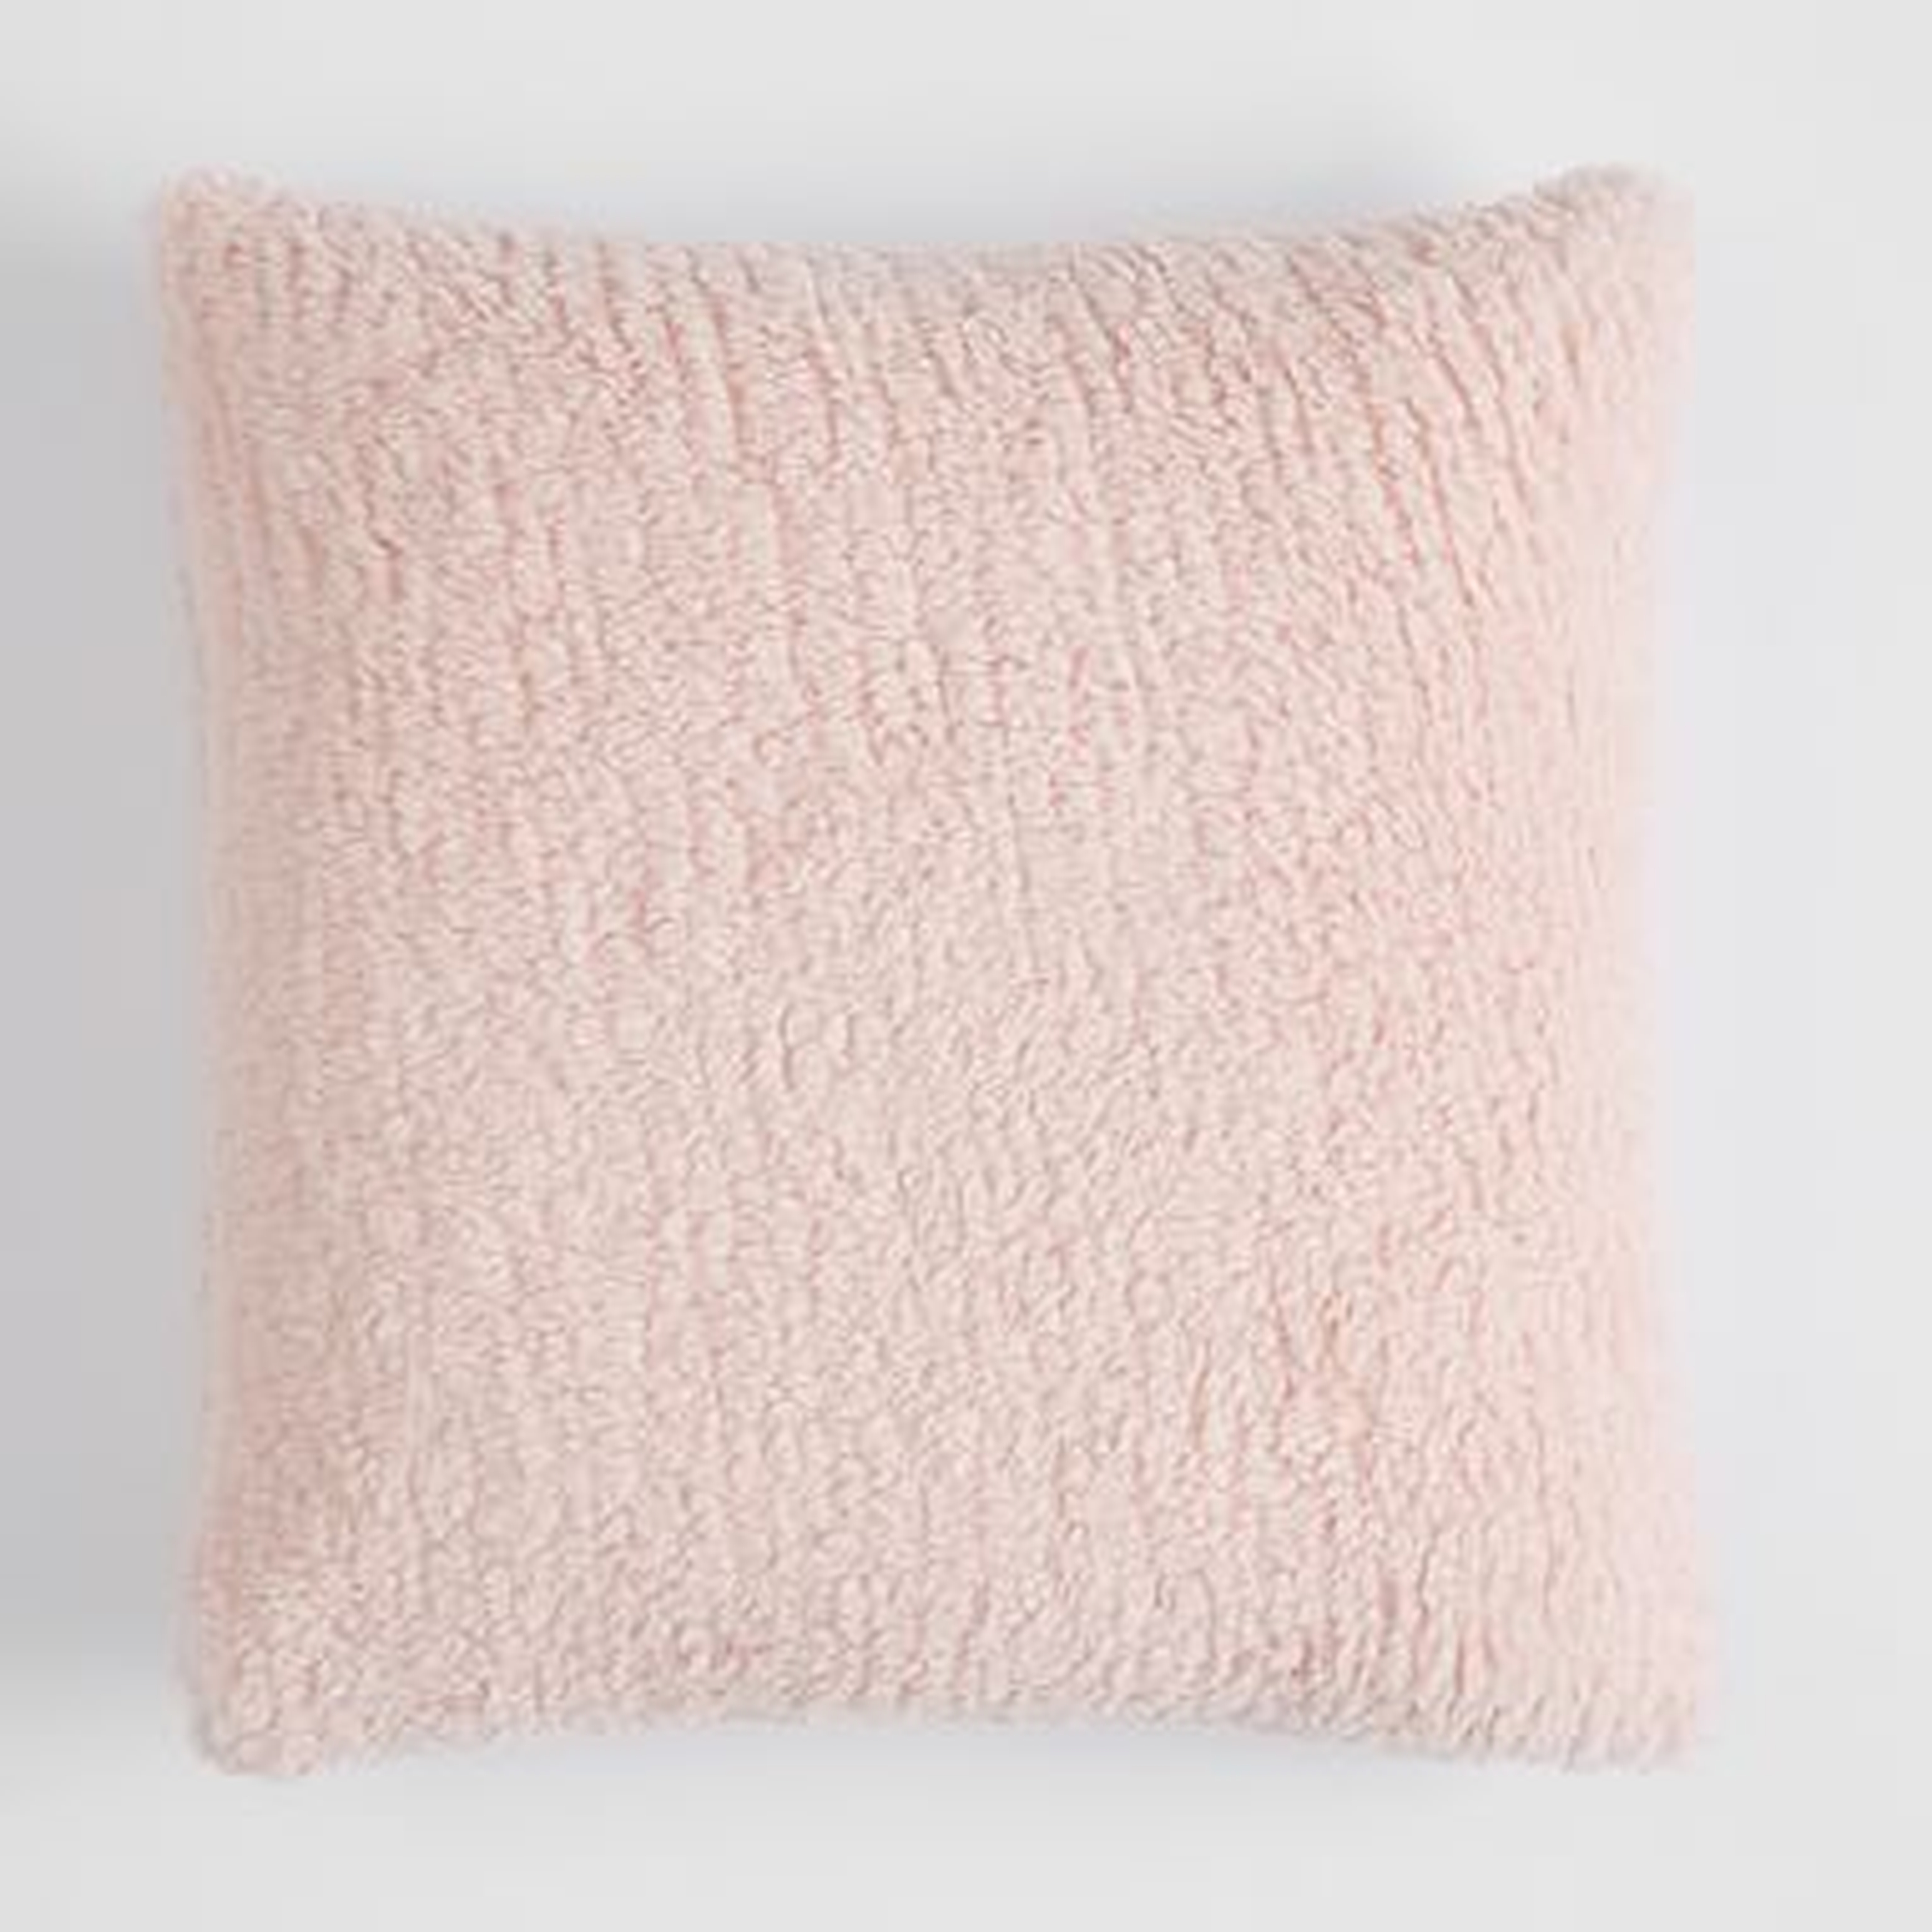 Cozy Pillow Cover, 18 x 18, Powdered Blush - Pottery Barn Teen